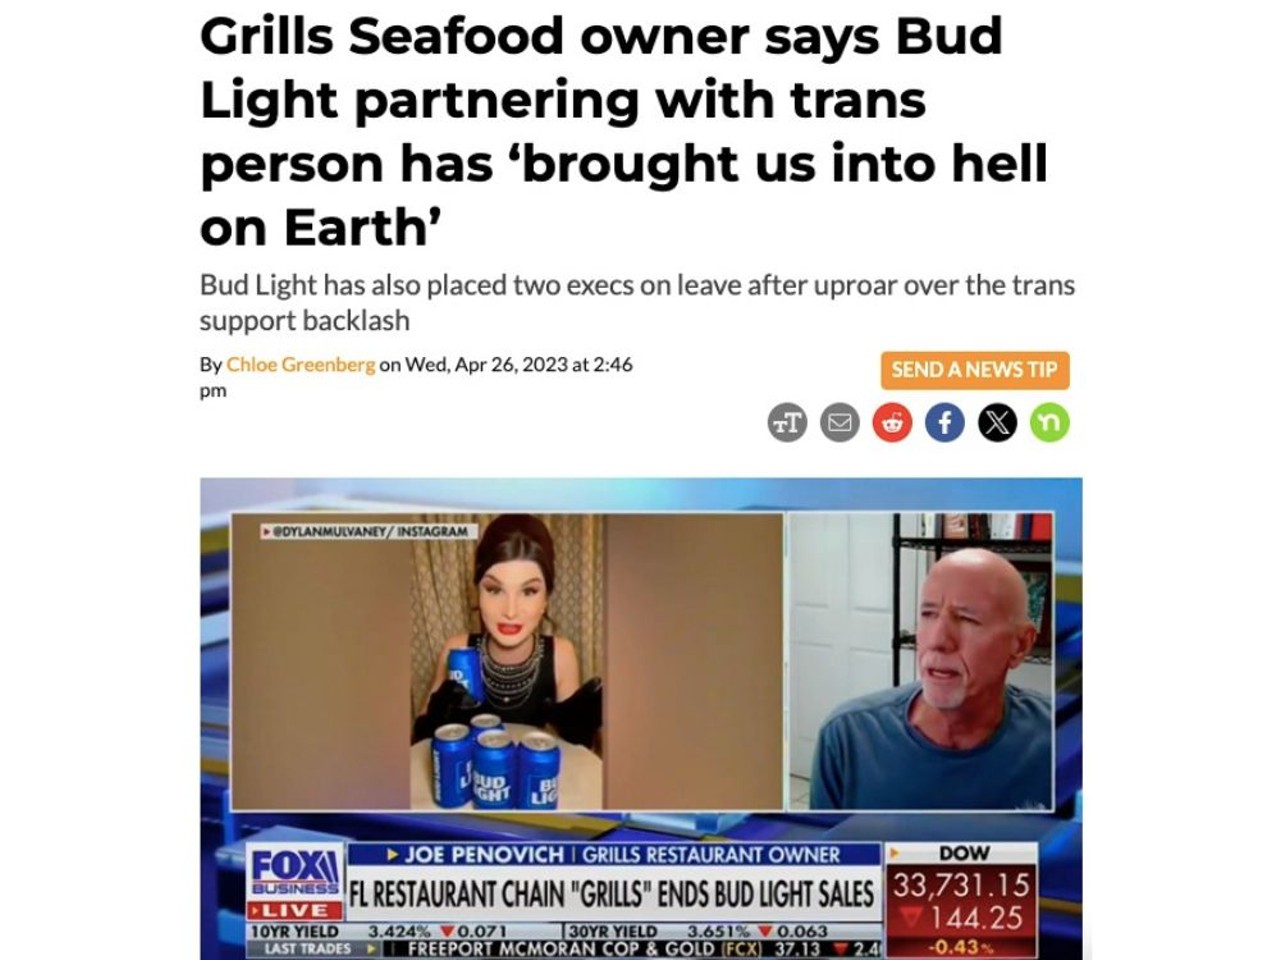 After he pulled Bud Light from all his restaurant's three locations, Grills Seafood Deck and Tiki Bar owner told Fox News the brand's partnership with a trans influencer has caused "hell on Earth." Joe Penovich confirmed the Orlando, Port Canaveral and Melbourne restaurants will no longer serve Bud Light after parent company Anheuser-Busch worked with Dylan Mulvaney, trans activist and TikTok influencer. Read full article